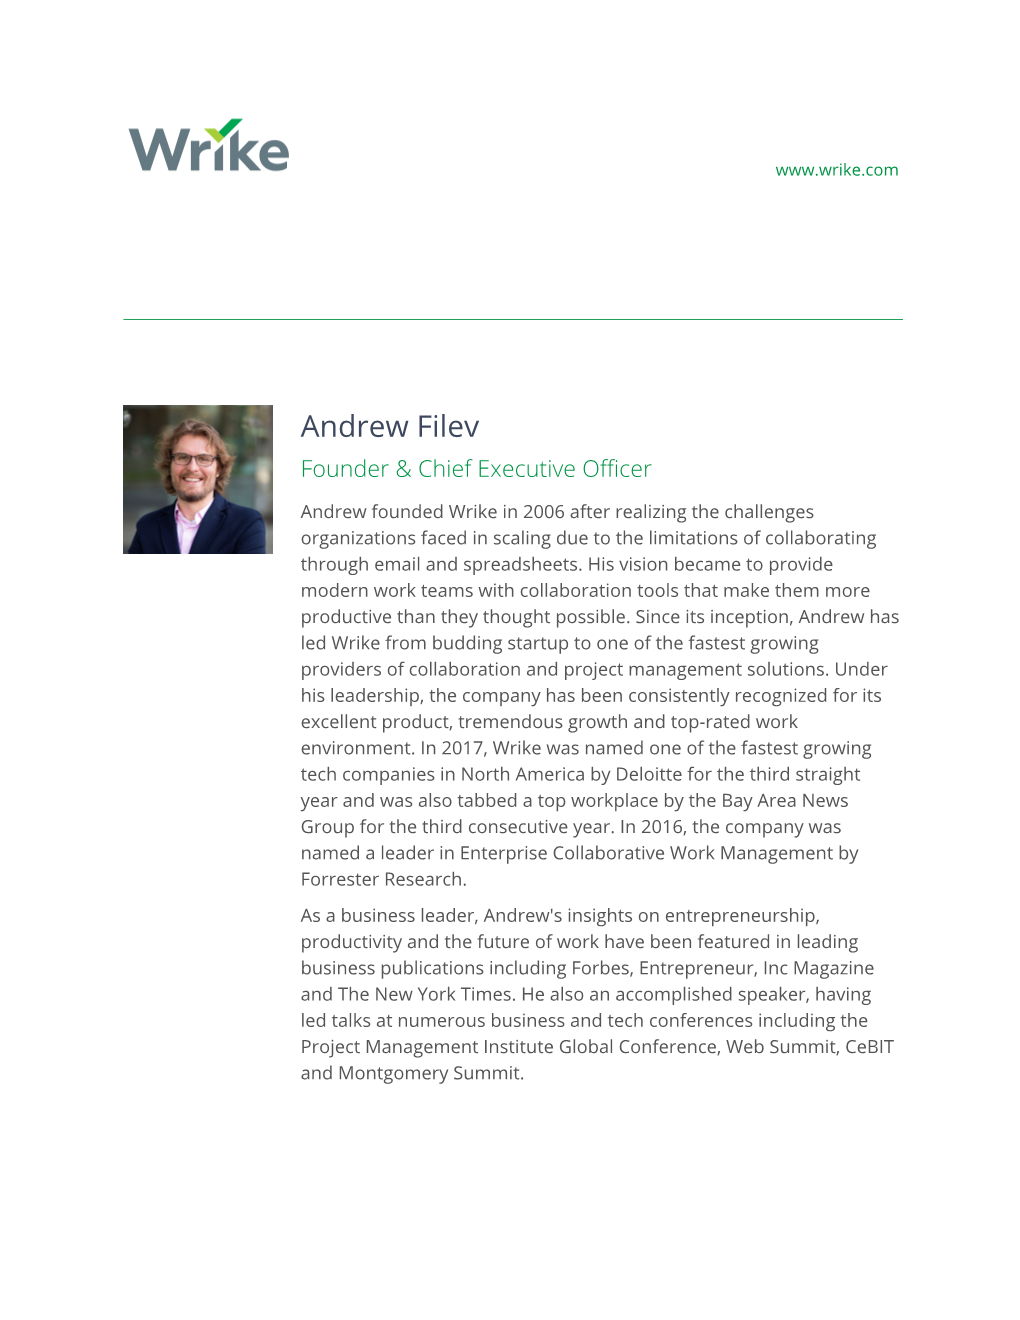 Andrew Filev Founder & Chief Executive Officer